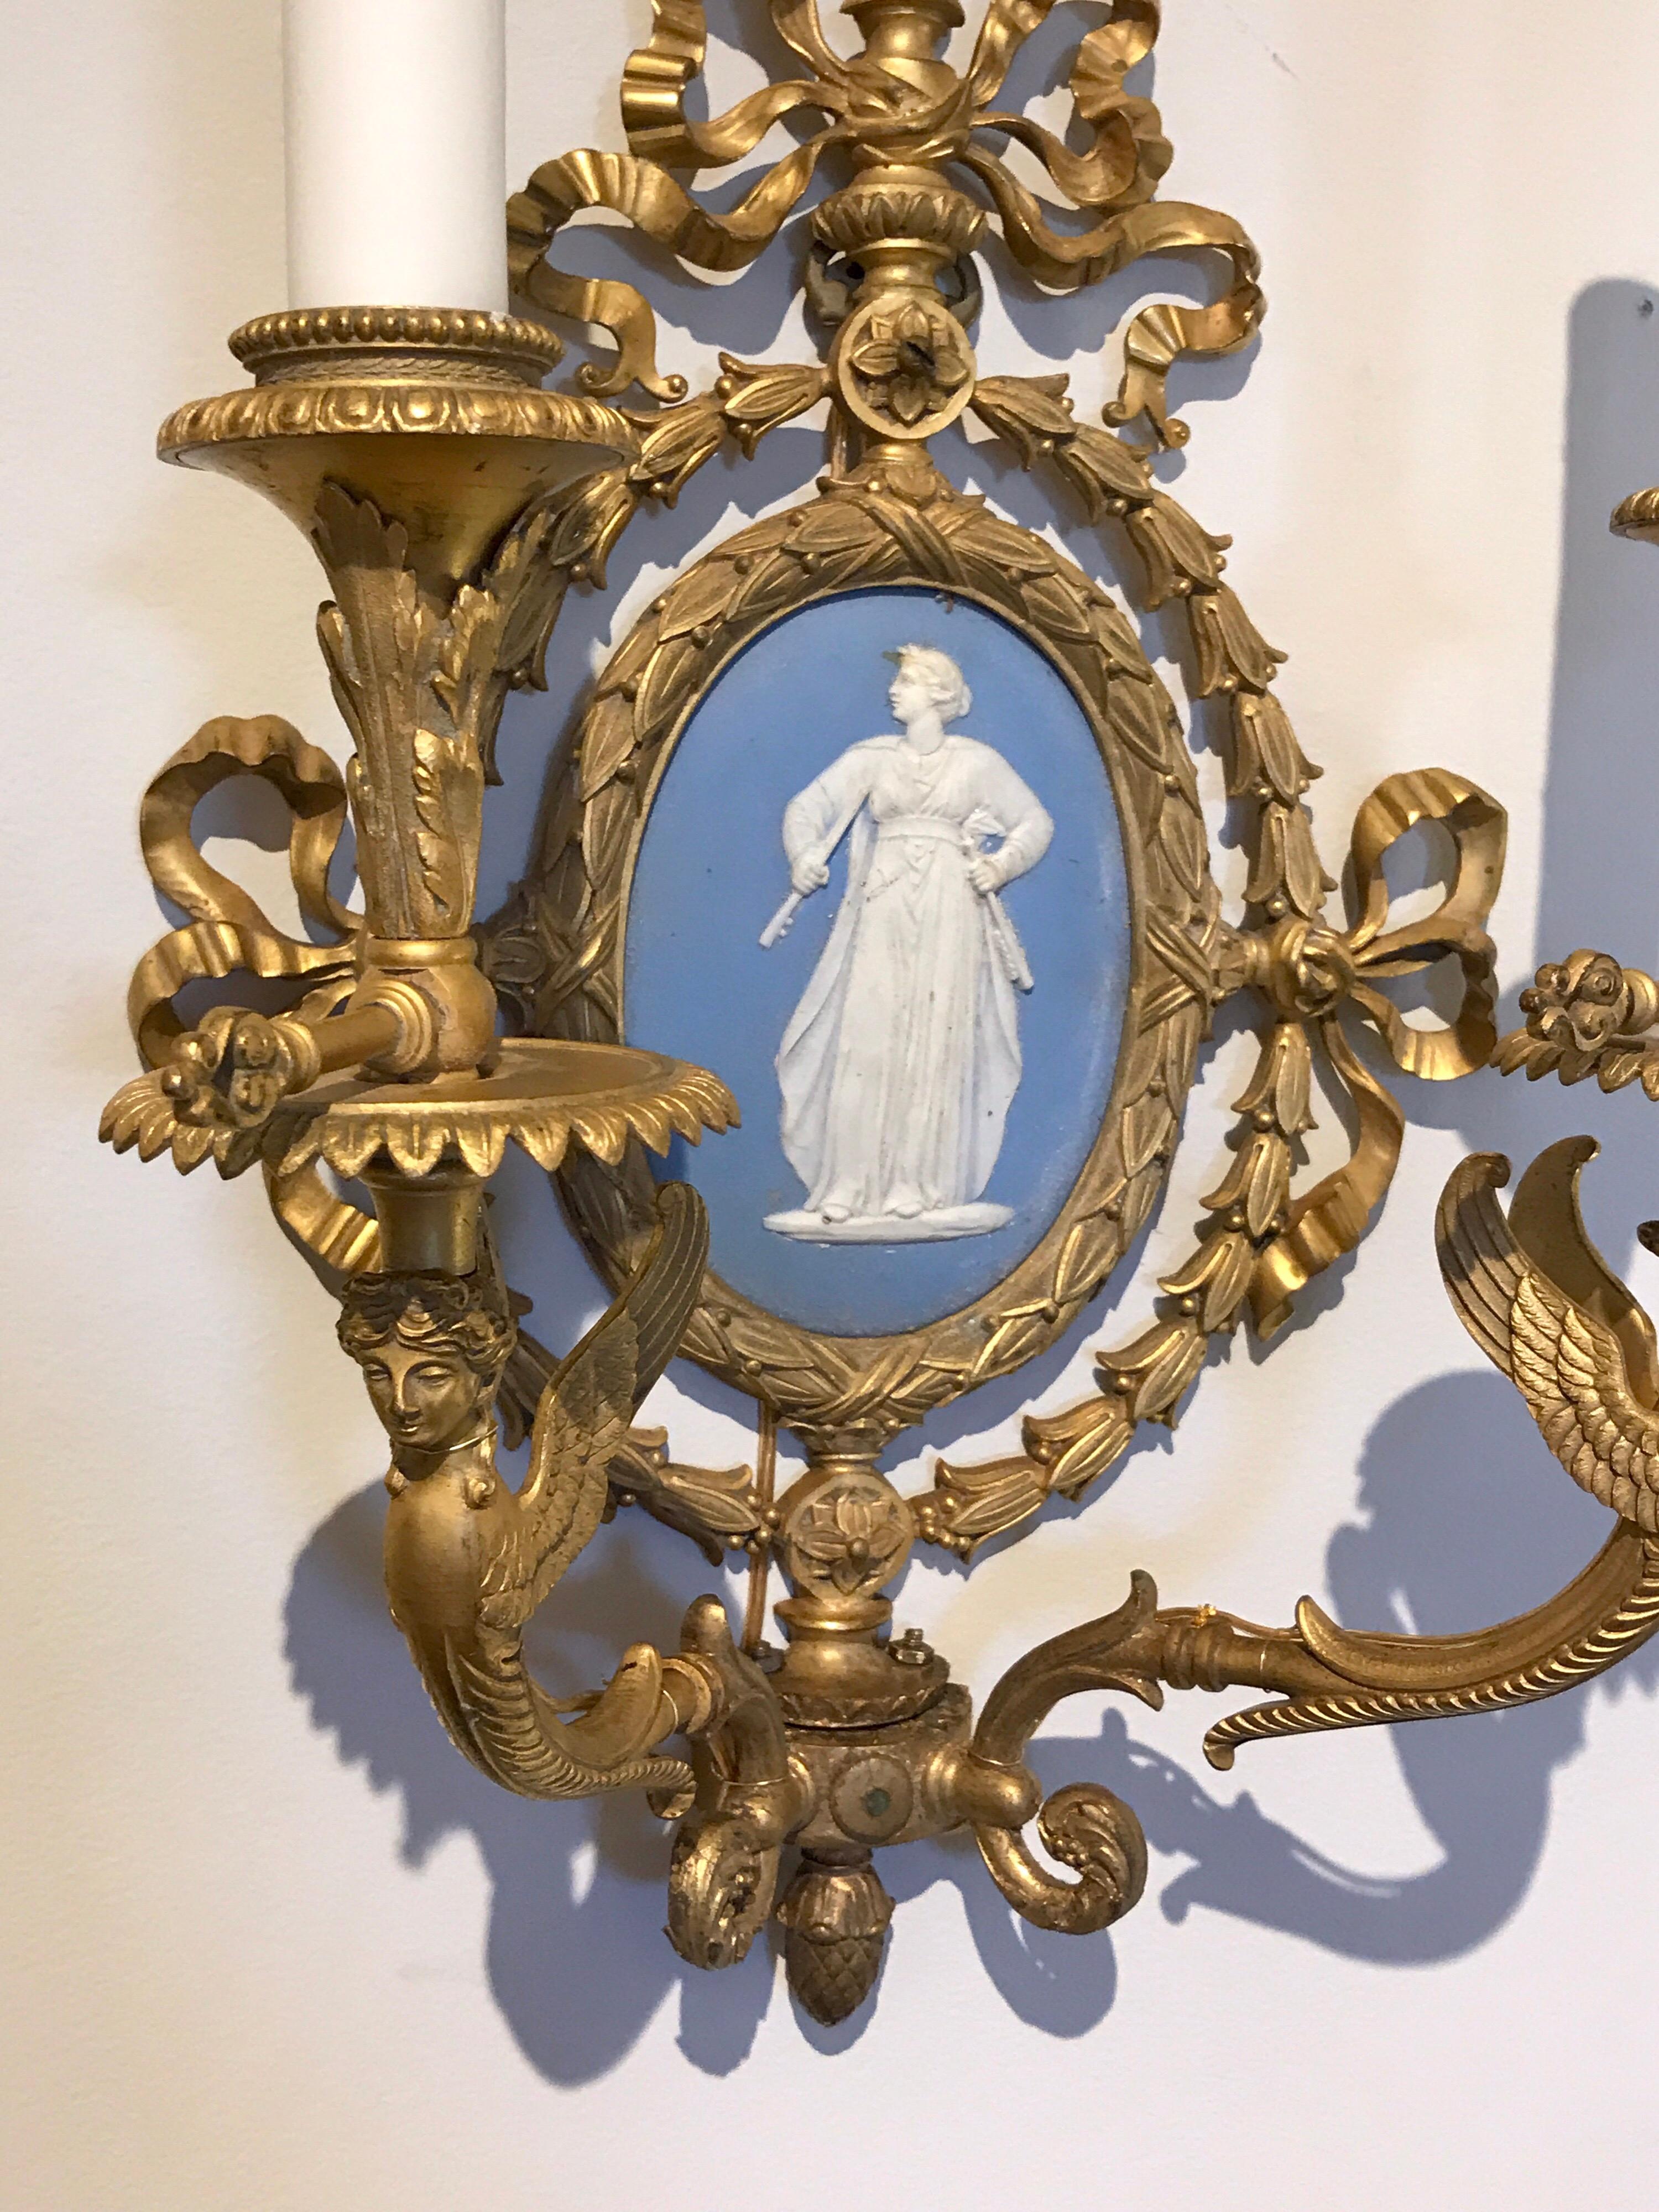 19th Century Pair of Exquisite Adam Style Ormolu Wall Sconces with Wedgwood Plaques For Sale